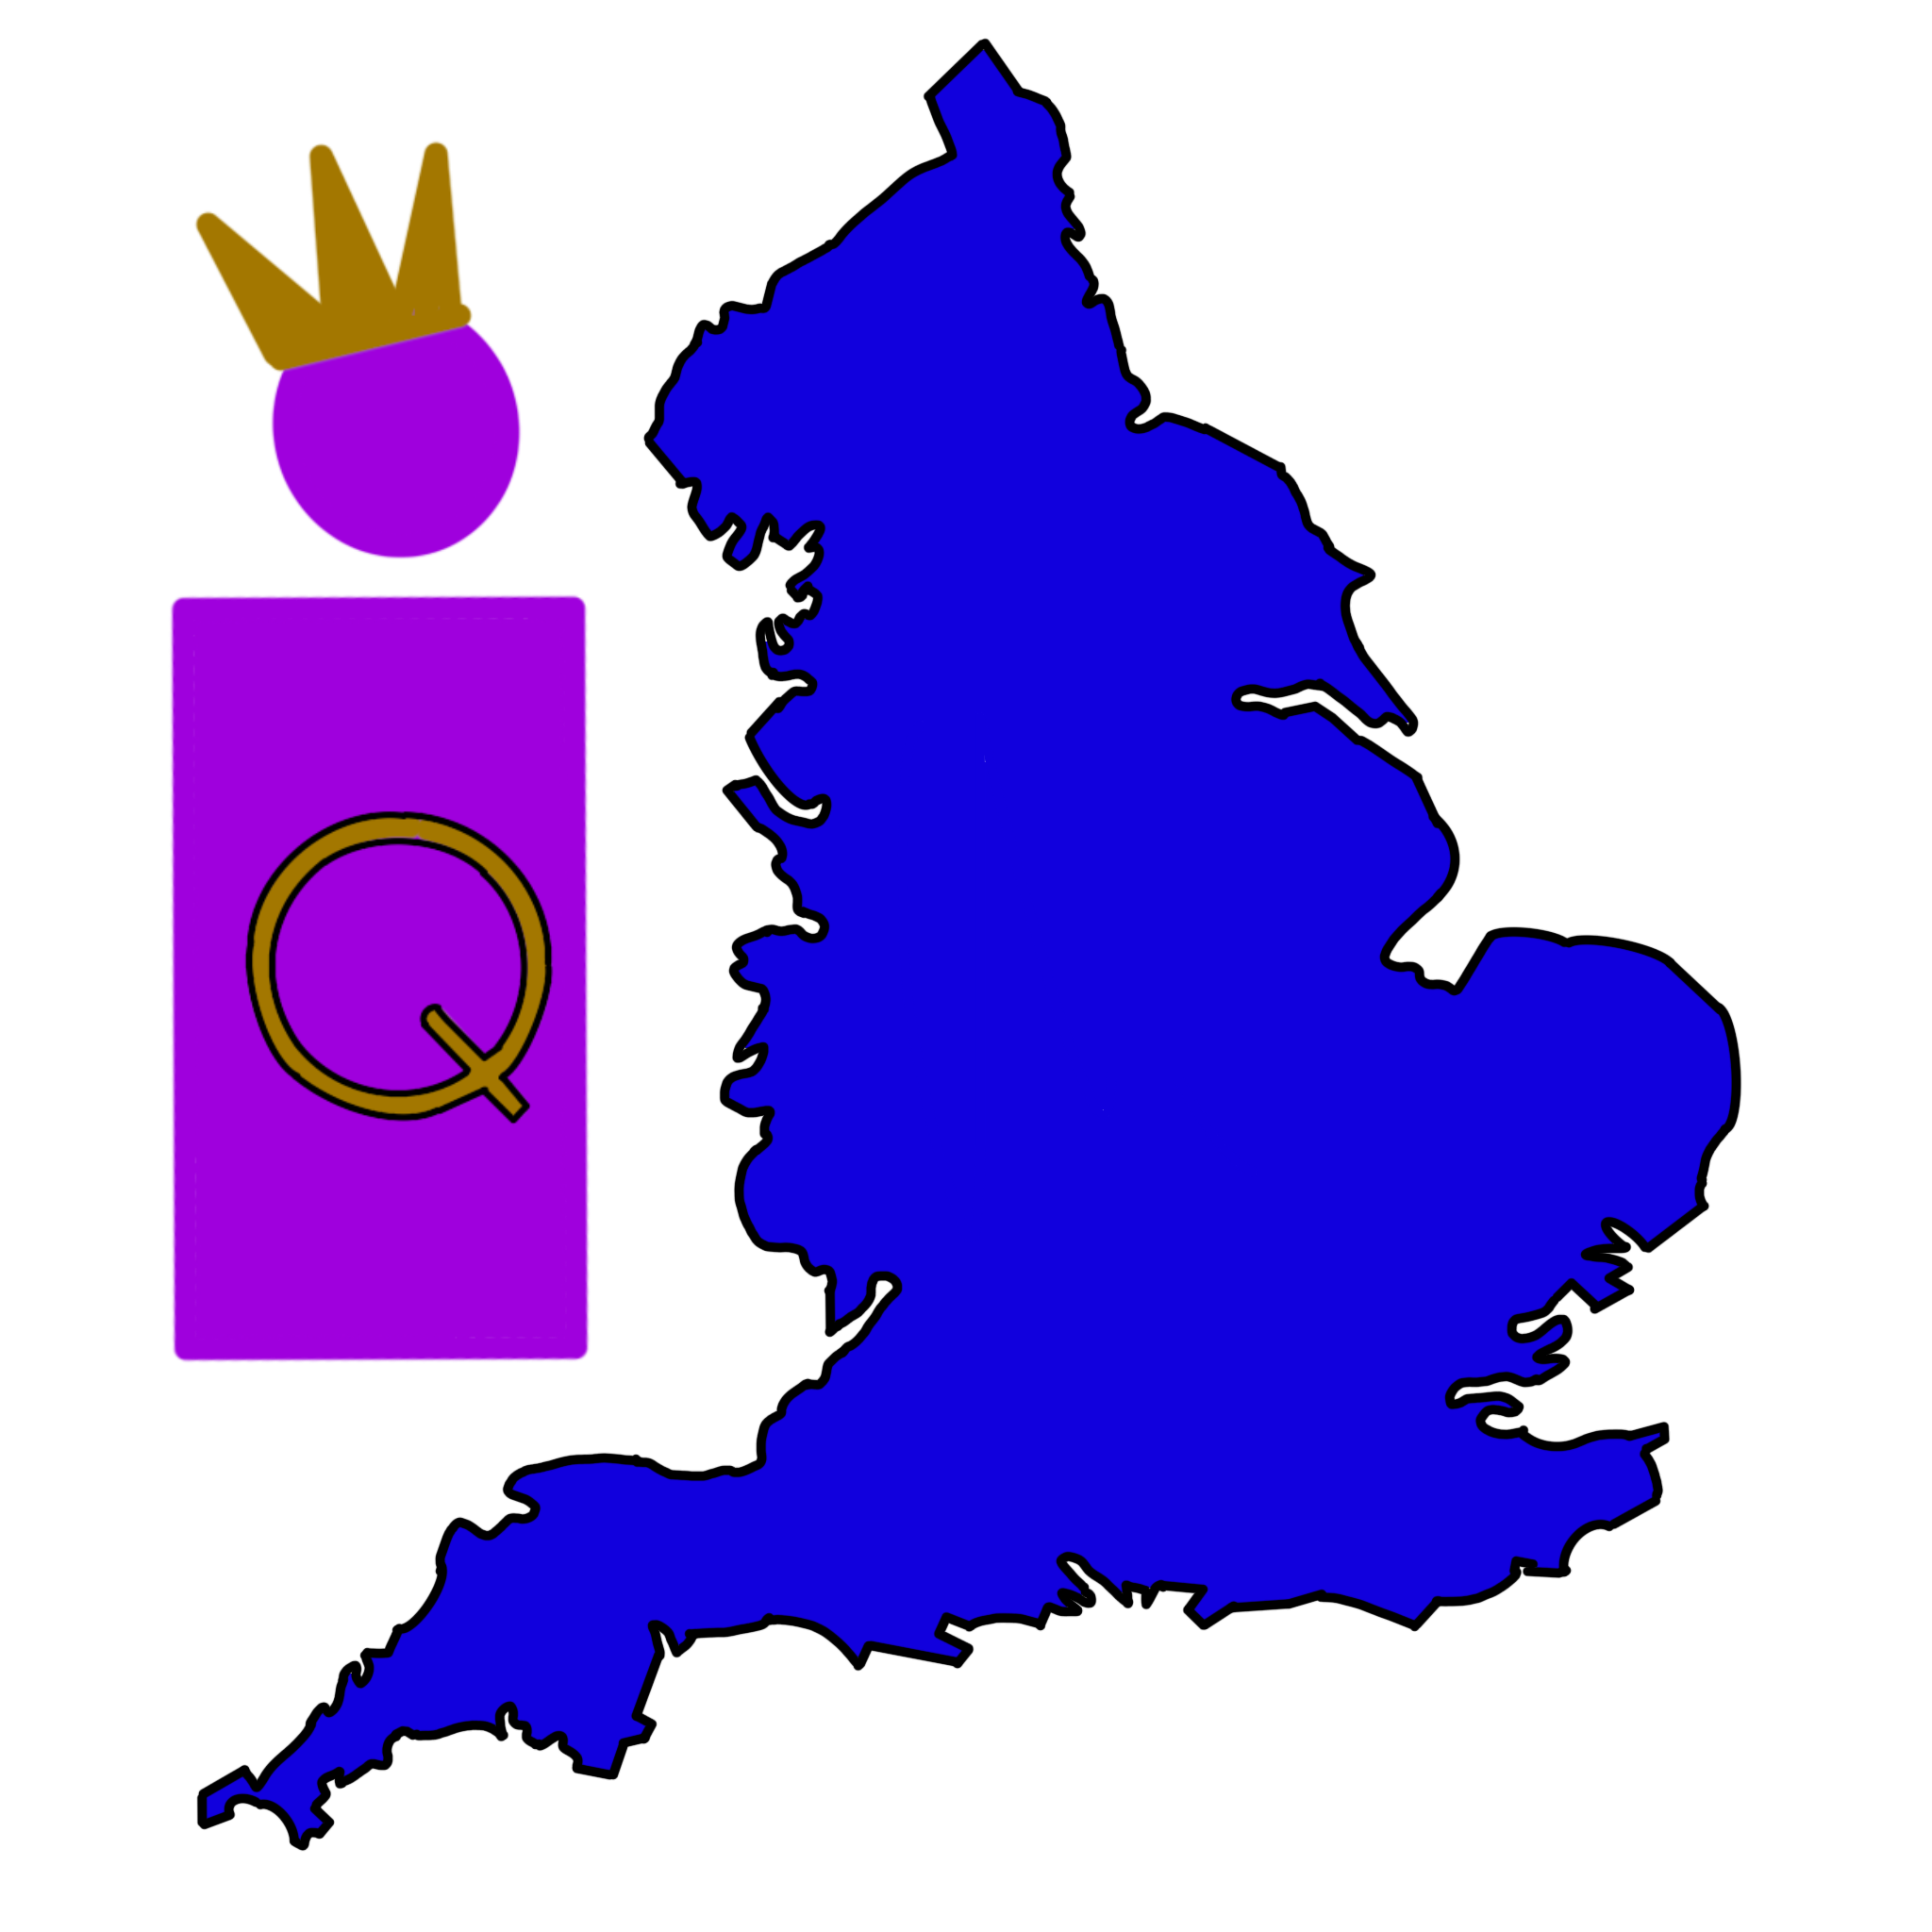 A drawing of England with a simply drawn person next to it. The person is purple with a gold crown their head and a gold Q on their chest. England is colored bright blue.